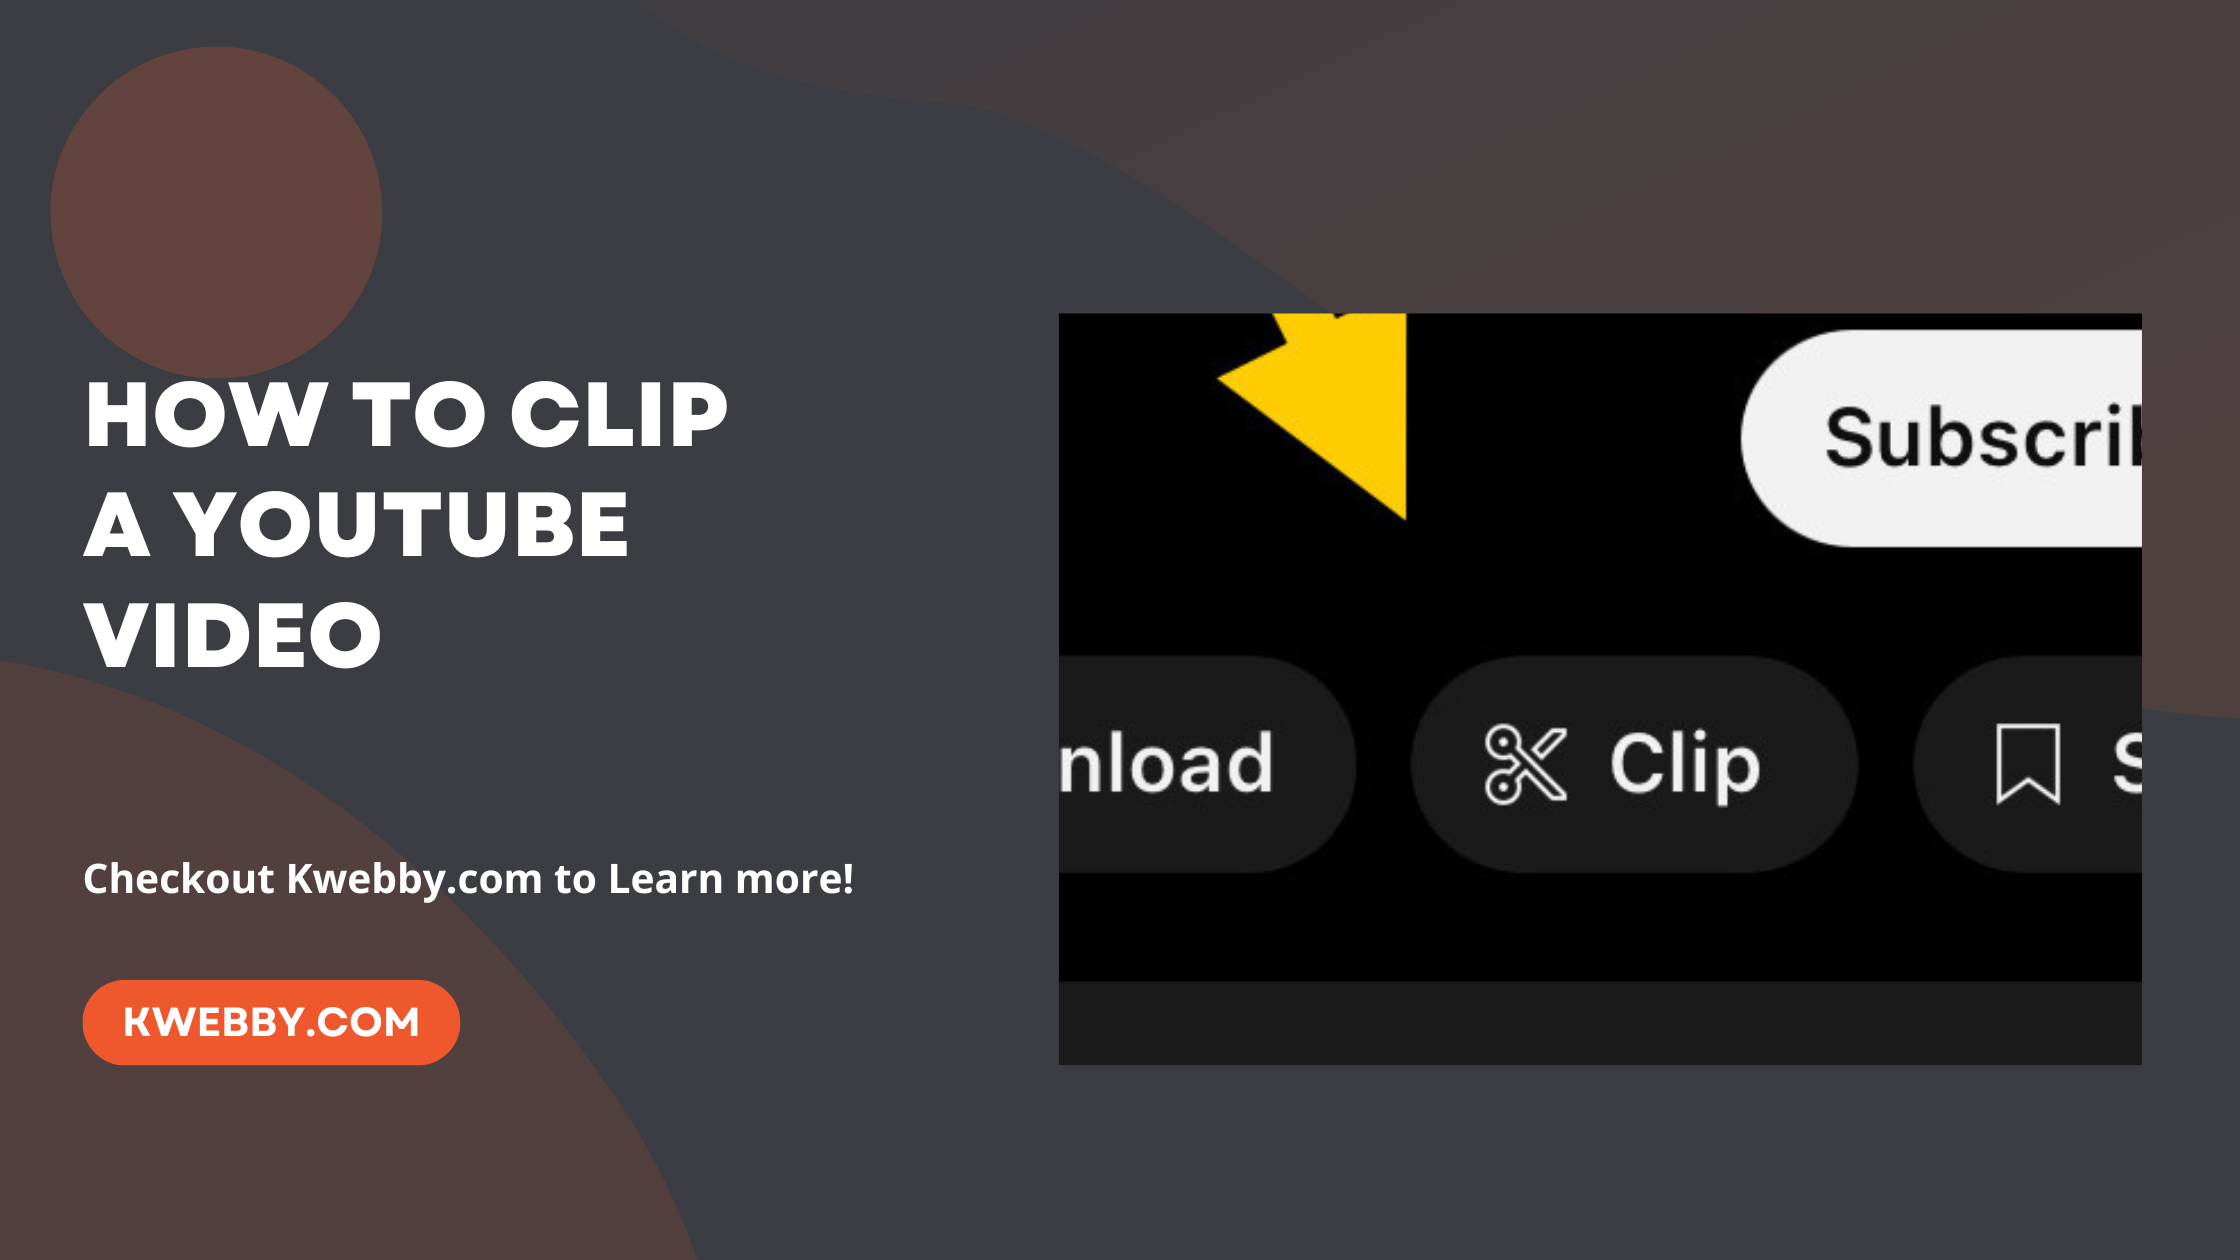 How to clip a YouTube video